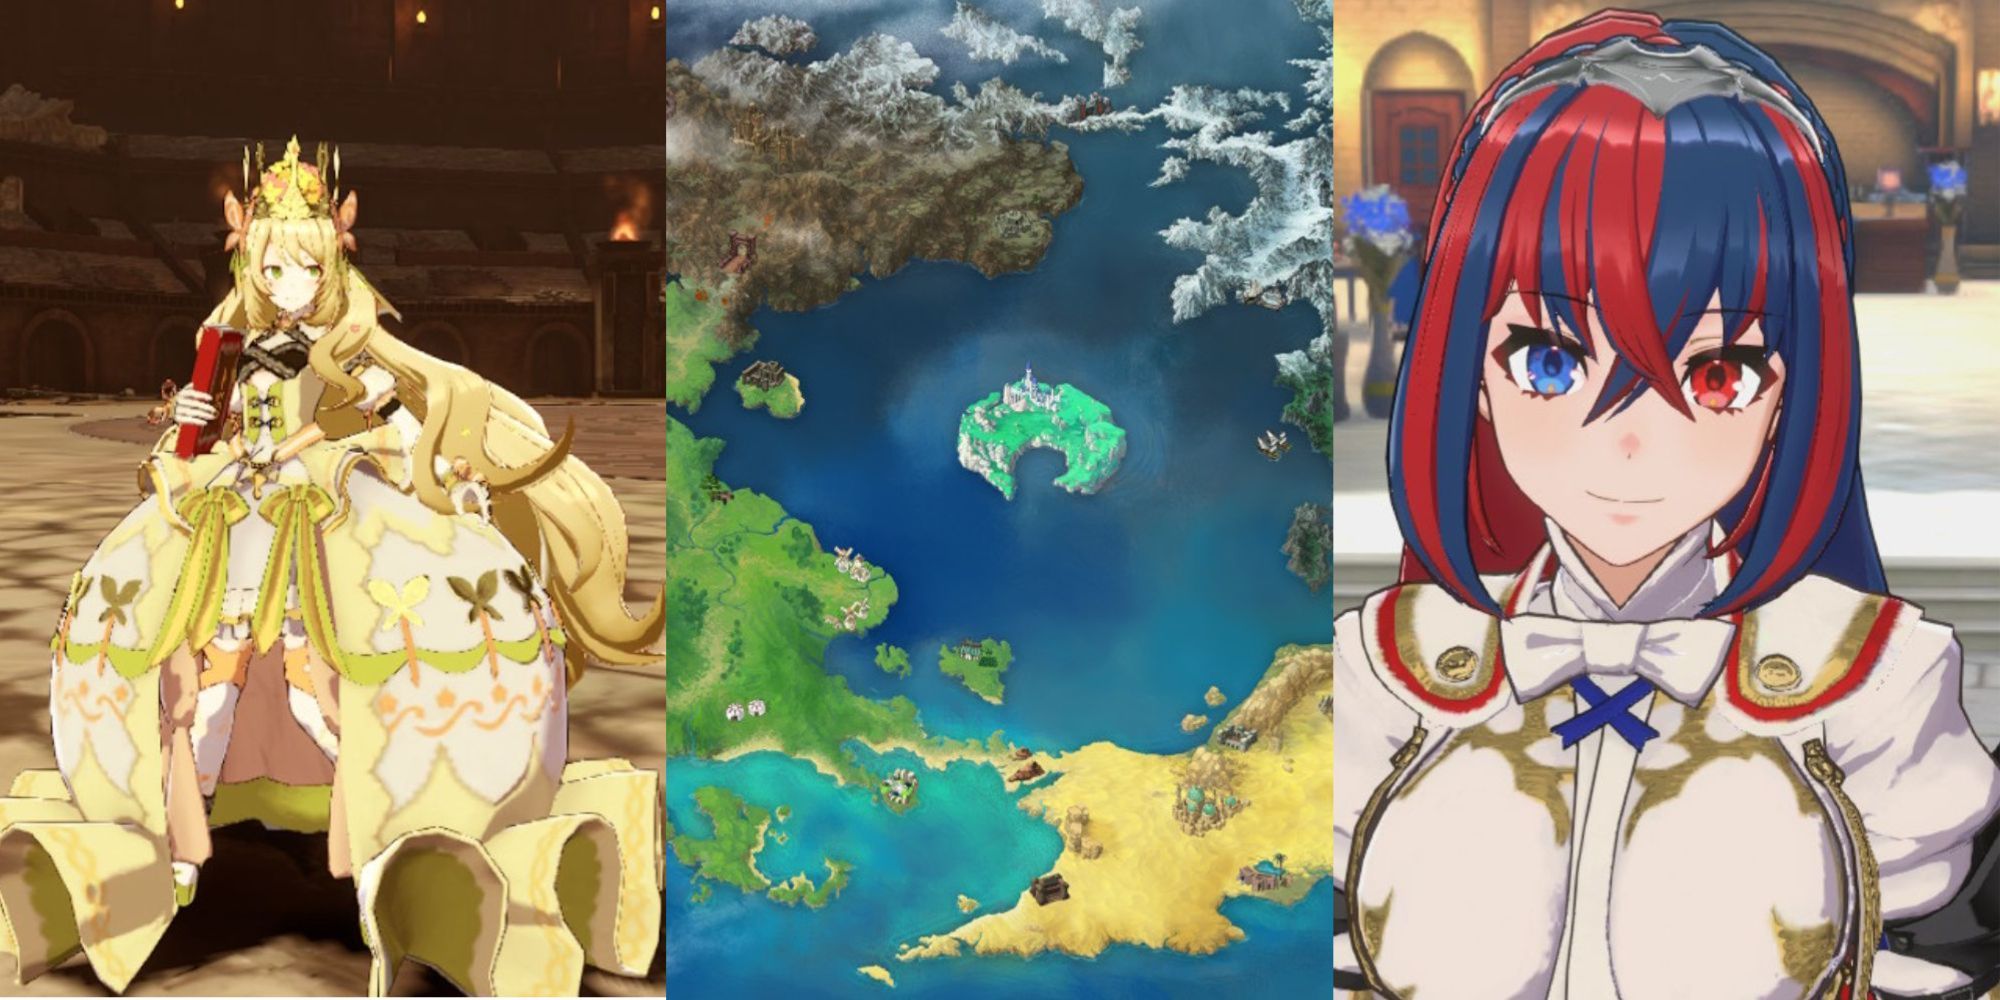 Fire Emblem engage main image with Alear, Celine, and the world map